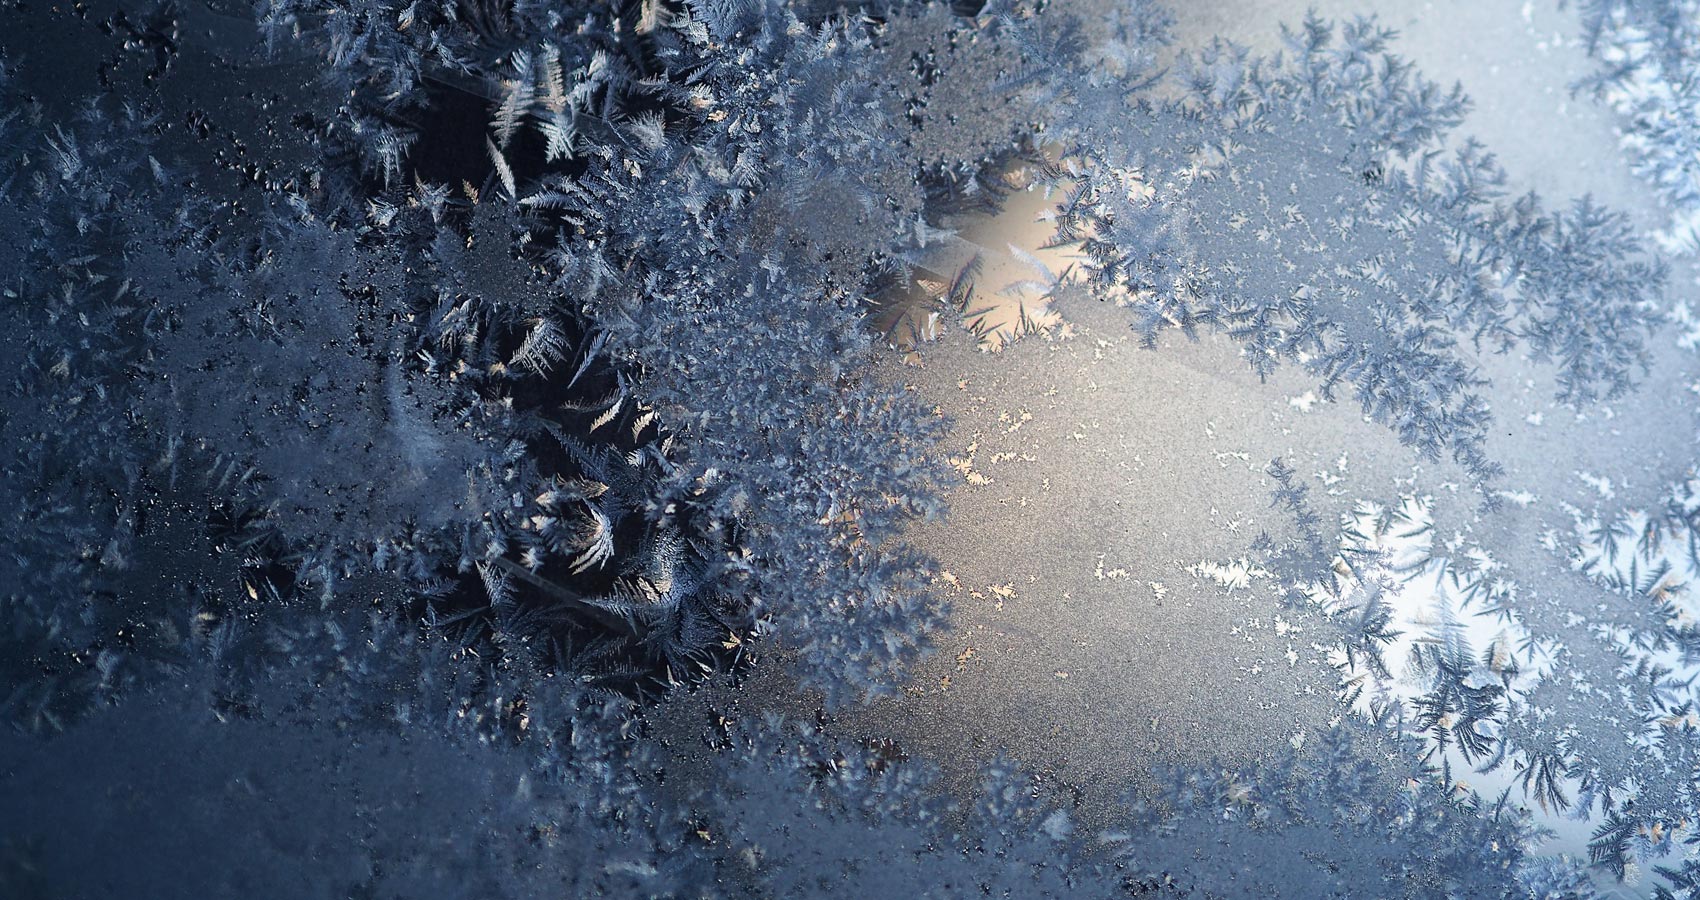 This Frost Upon Me, flash fiction by Richard M. Ankers at Spillwords.com